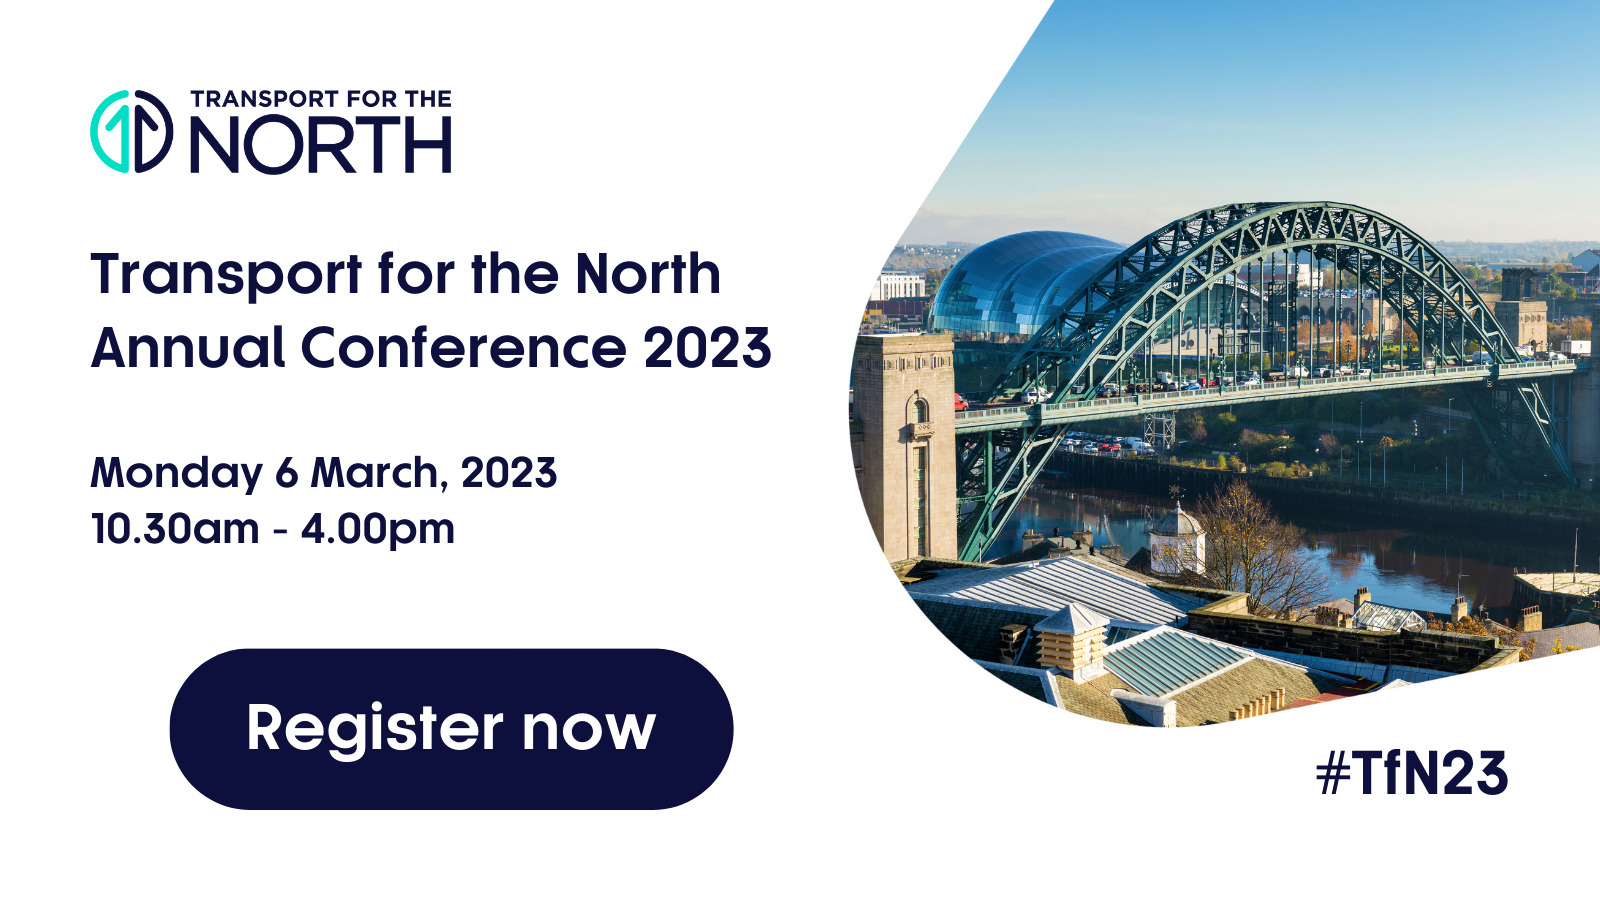 Details of Transport for the North's Annual Conference 2023